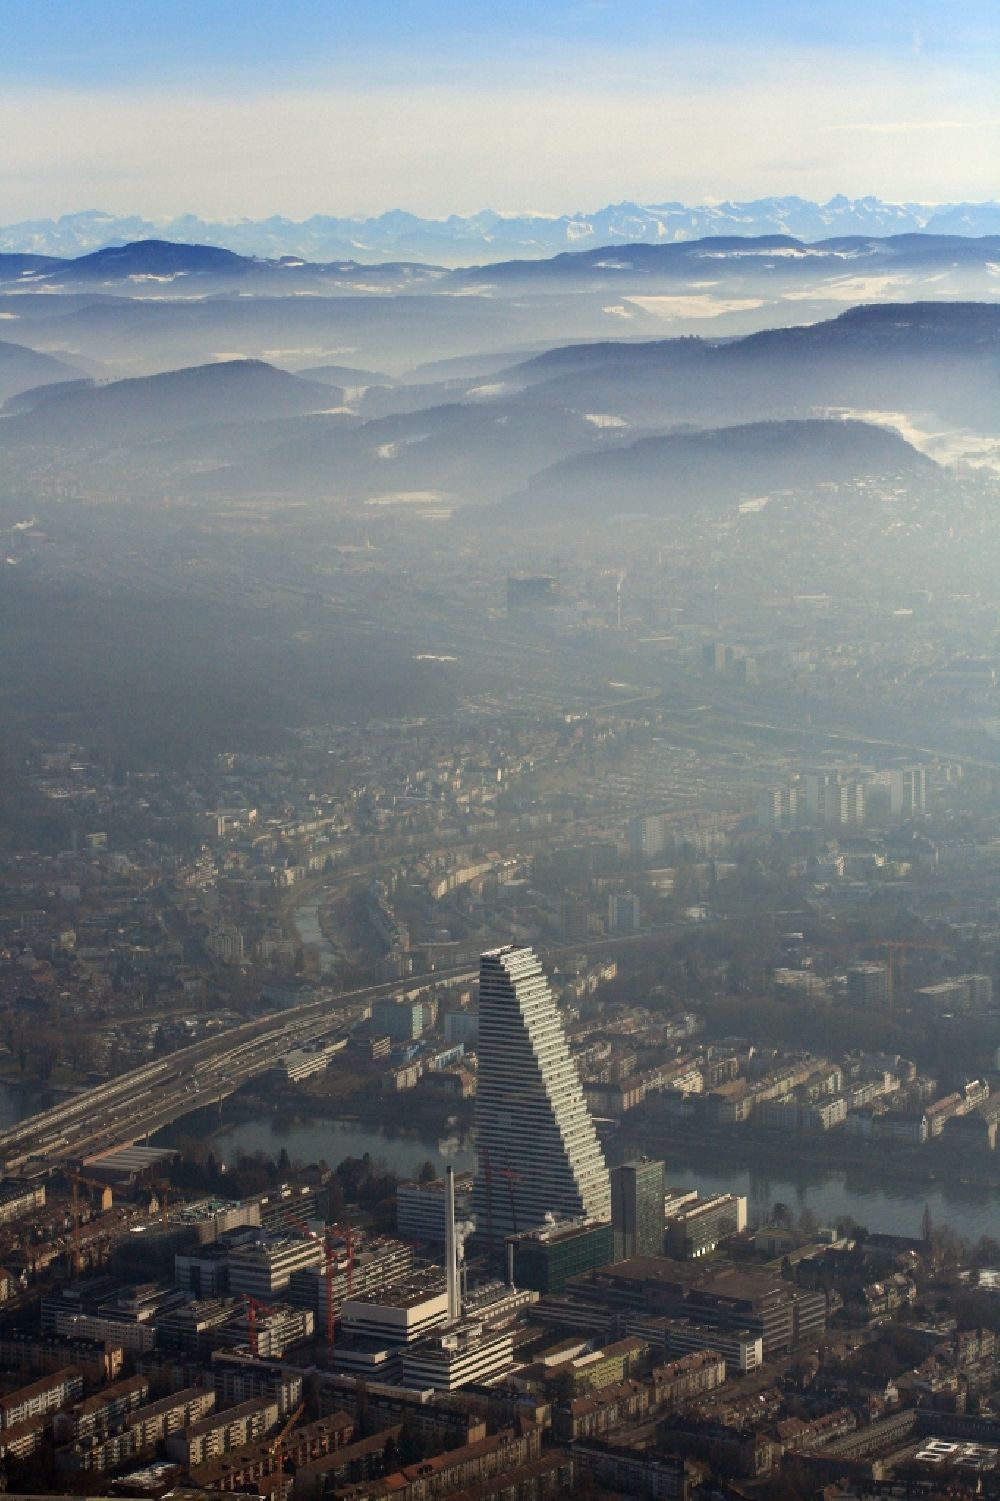 Aerial photograph Basel - Panorama from the local area of Basle in Switzerland, looking to the south over the impressive Roche skyscraper, the Jura mountains to the Swiss alps